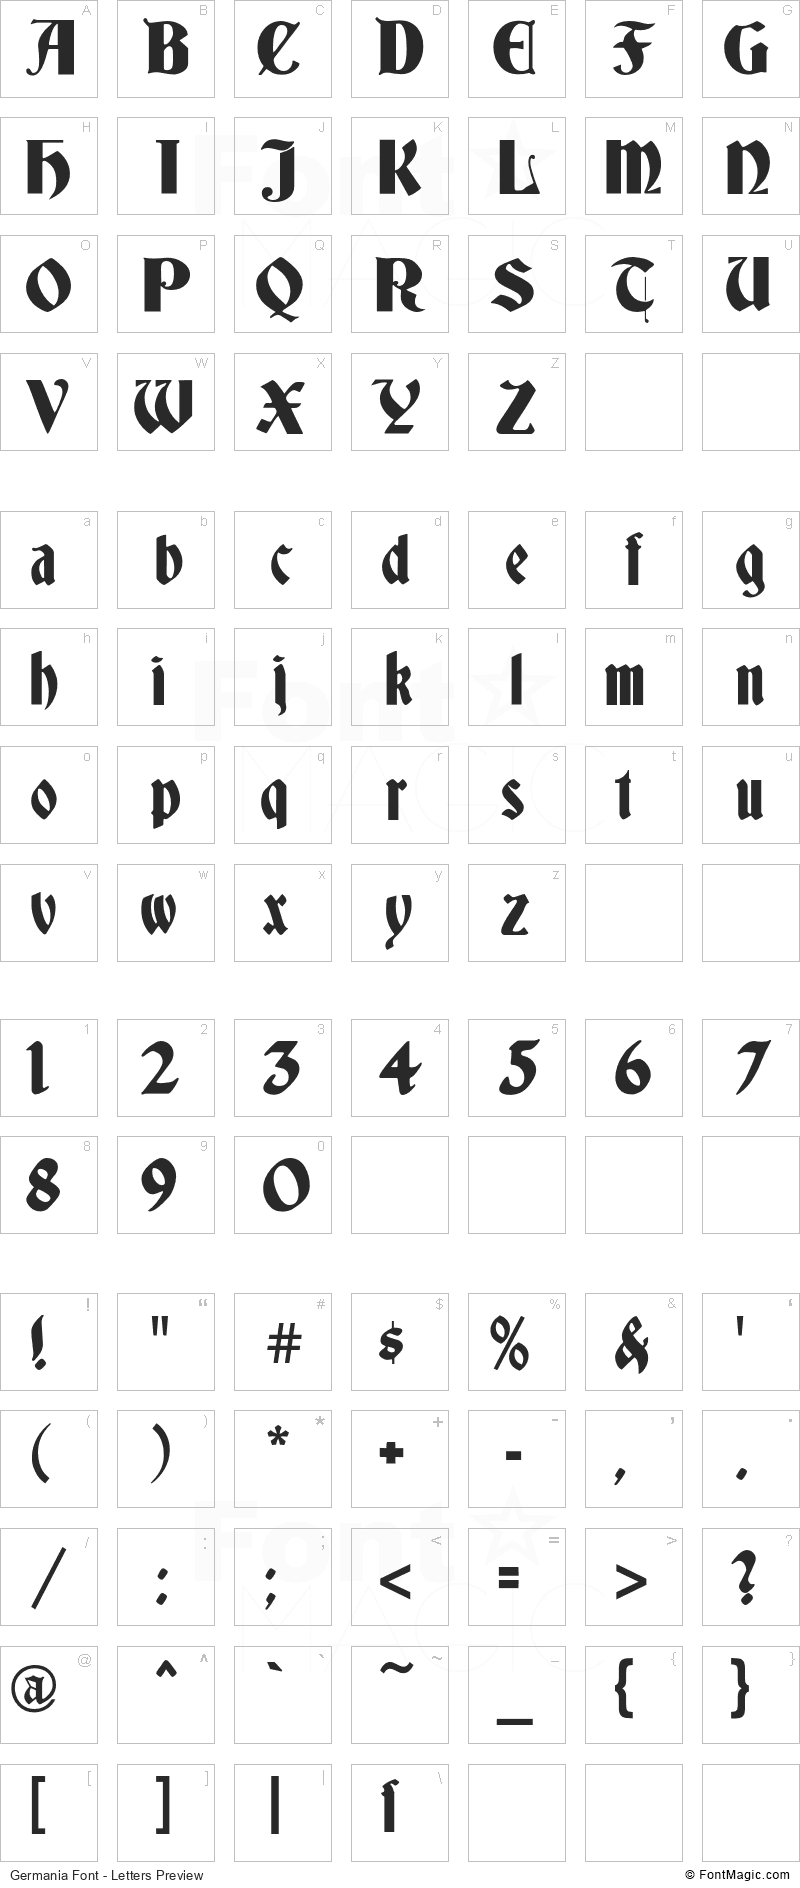 Germania Font - All Latters Preview Chart